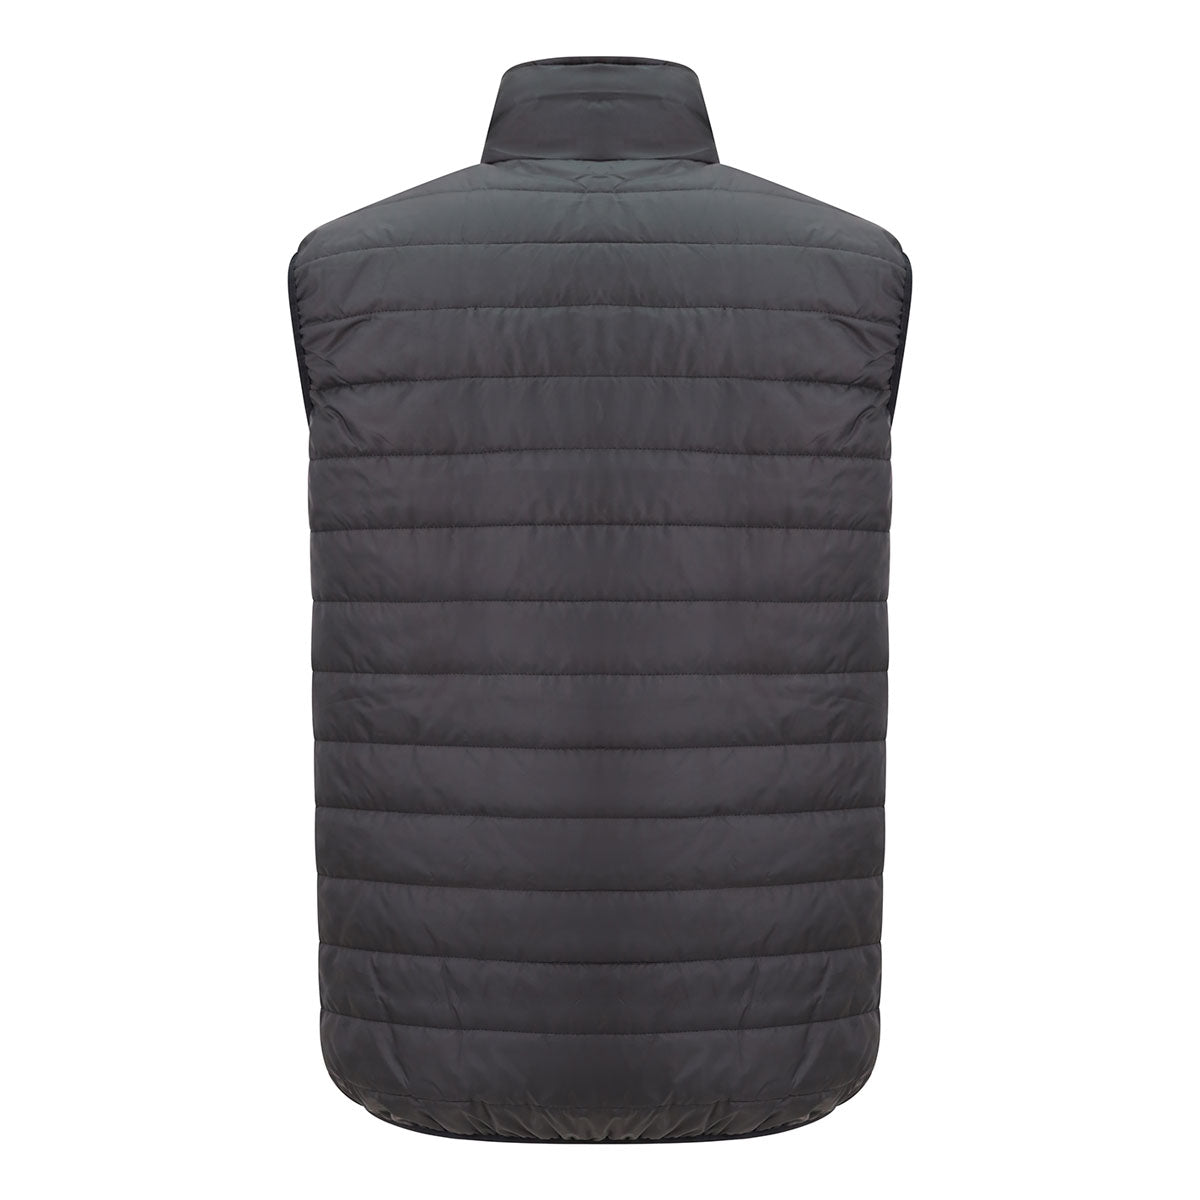 Mc Keever Tyrone Towers Basketball Core 22 Padded Gilet - Adult - Black